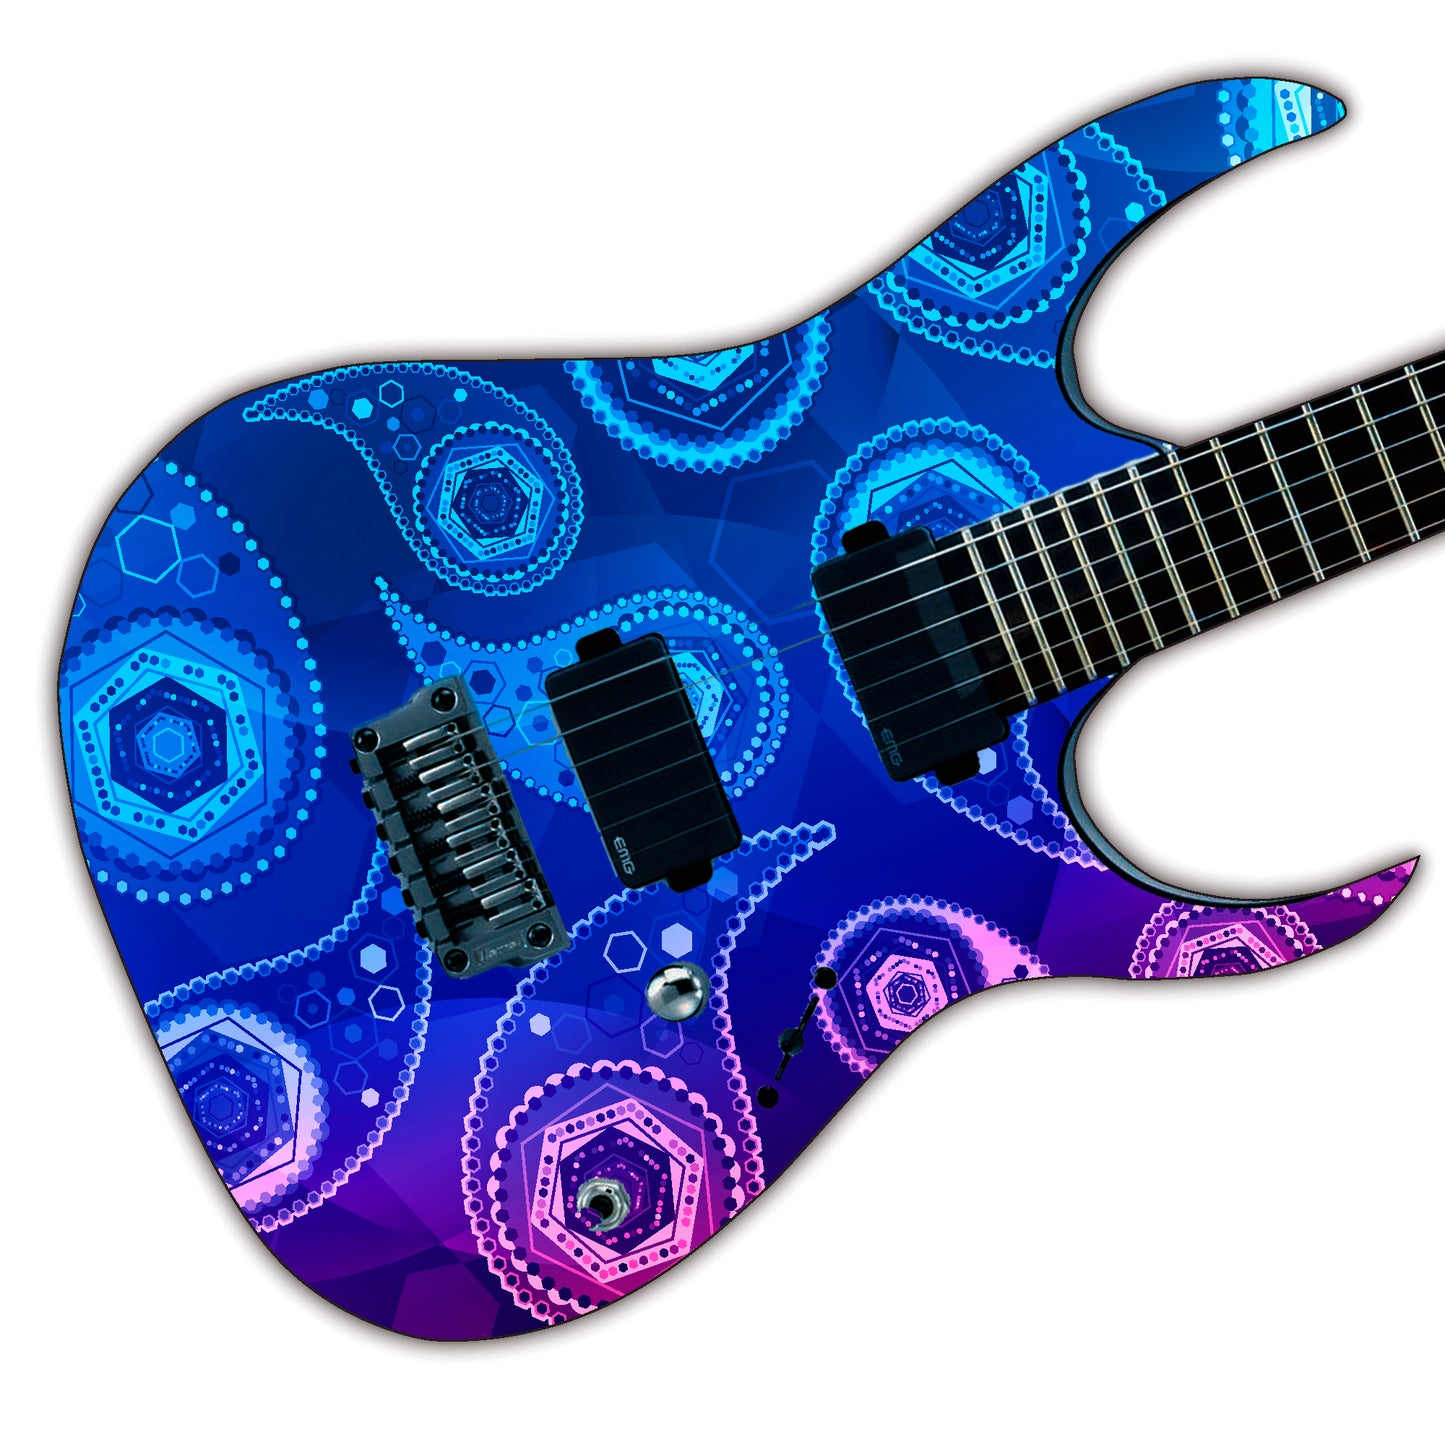 Guitar, Bass or Acoustic Skin Wrap Laminated Vinyl Decal Sticker 80's Paisley GS63